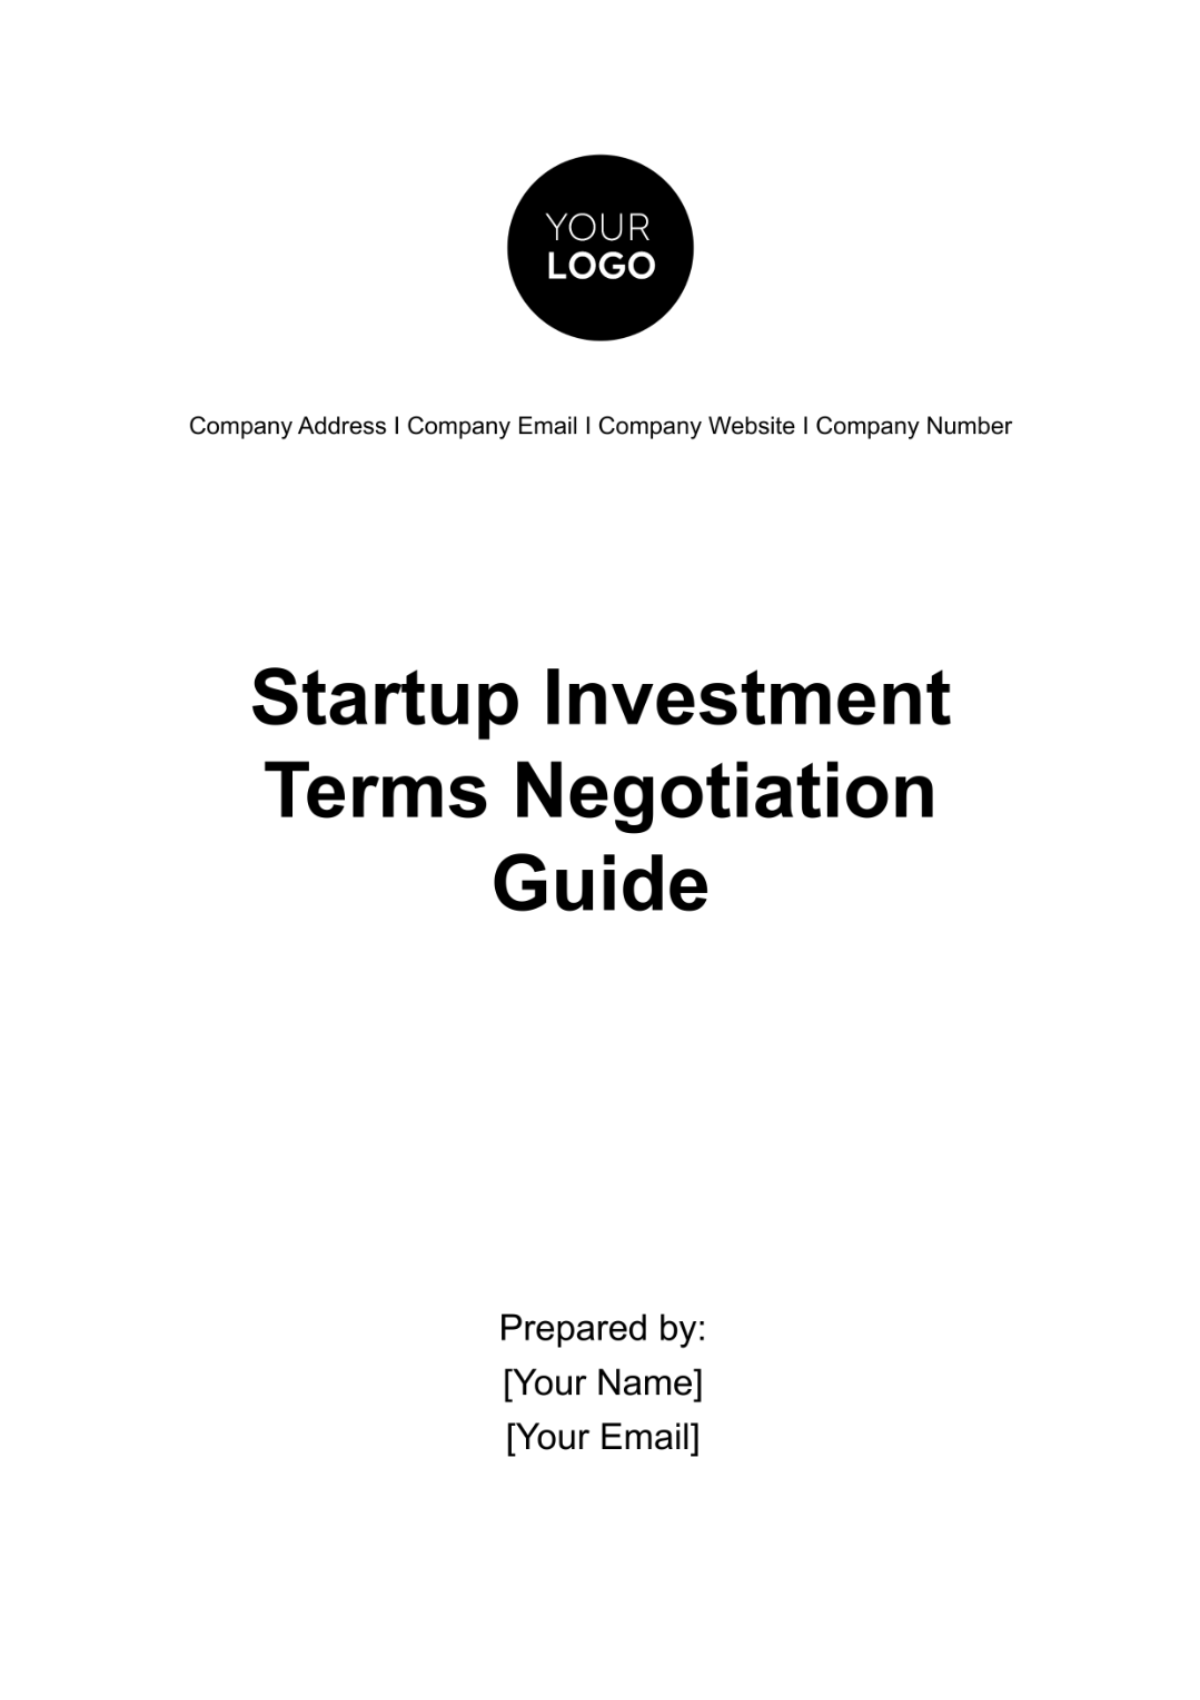 Startup Investment Terms Negotiation Guide Template